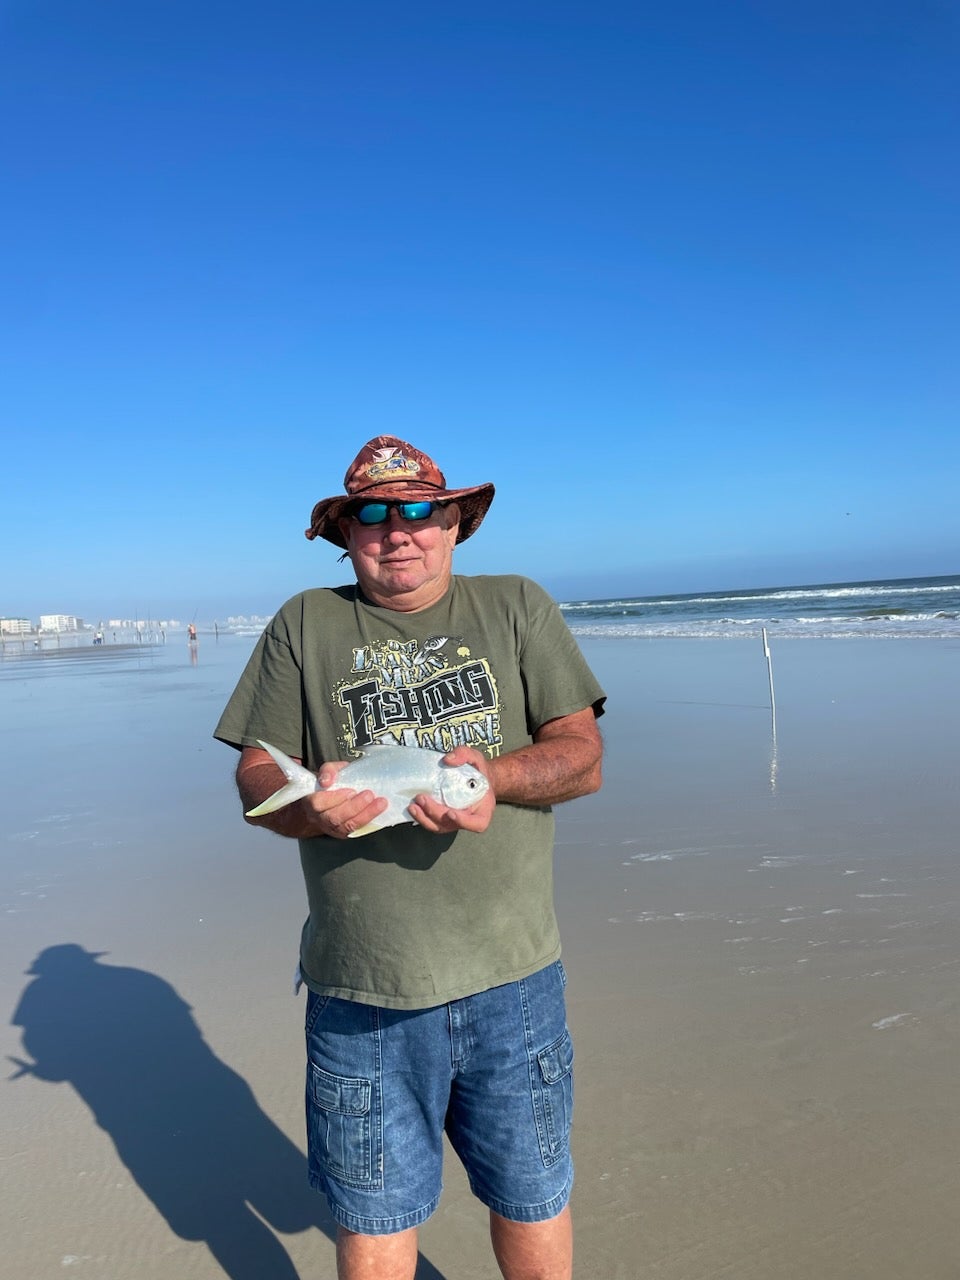 Roy Mattson - Business Owner - Roy's Bait and Seafood & Guide Service